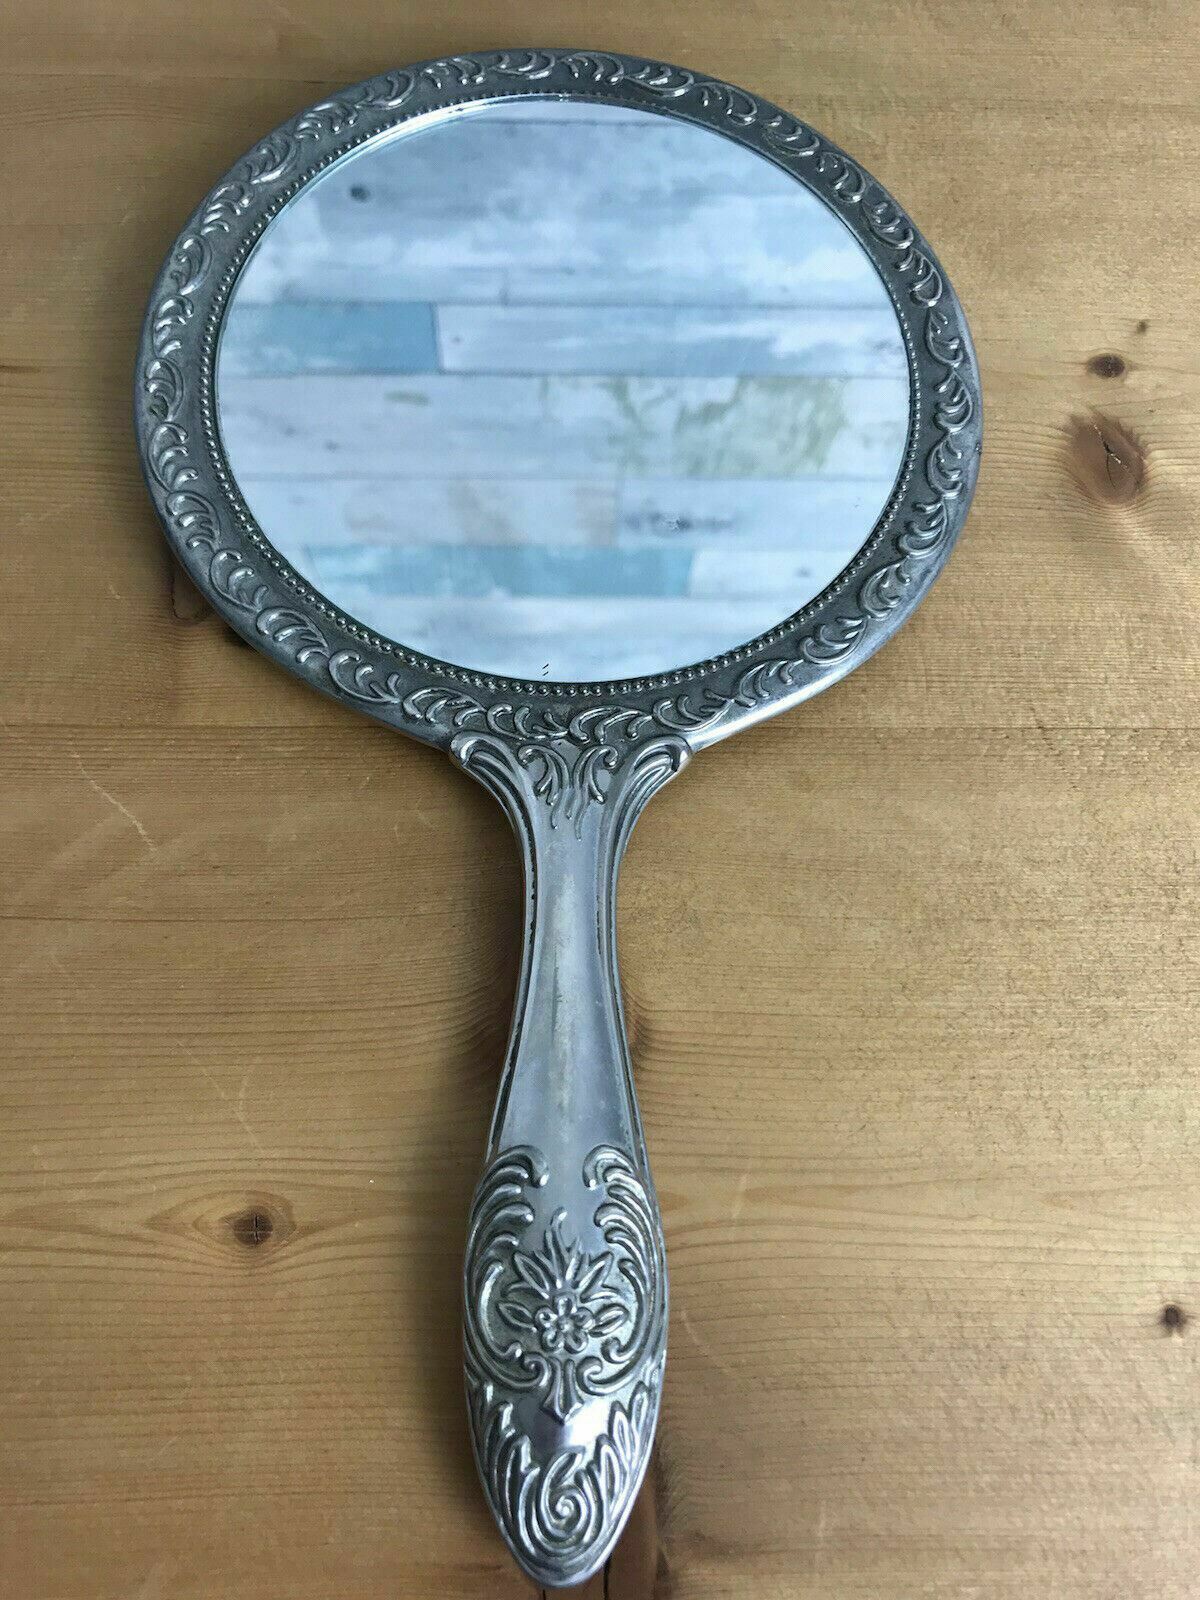 Attractive Victorian Style Handheld Mirror with Elegant Ornate Detail 